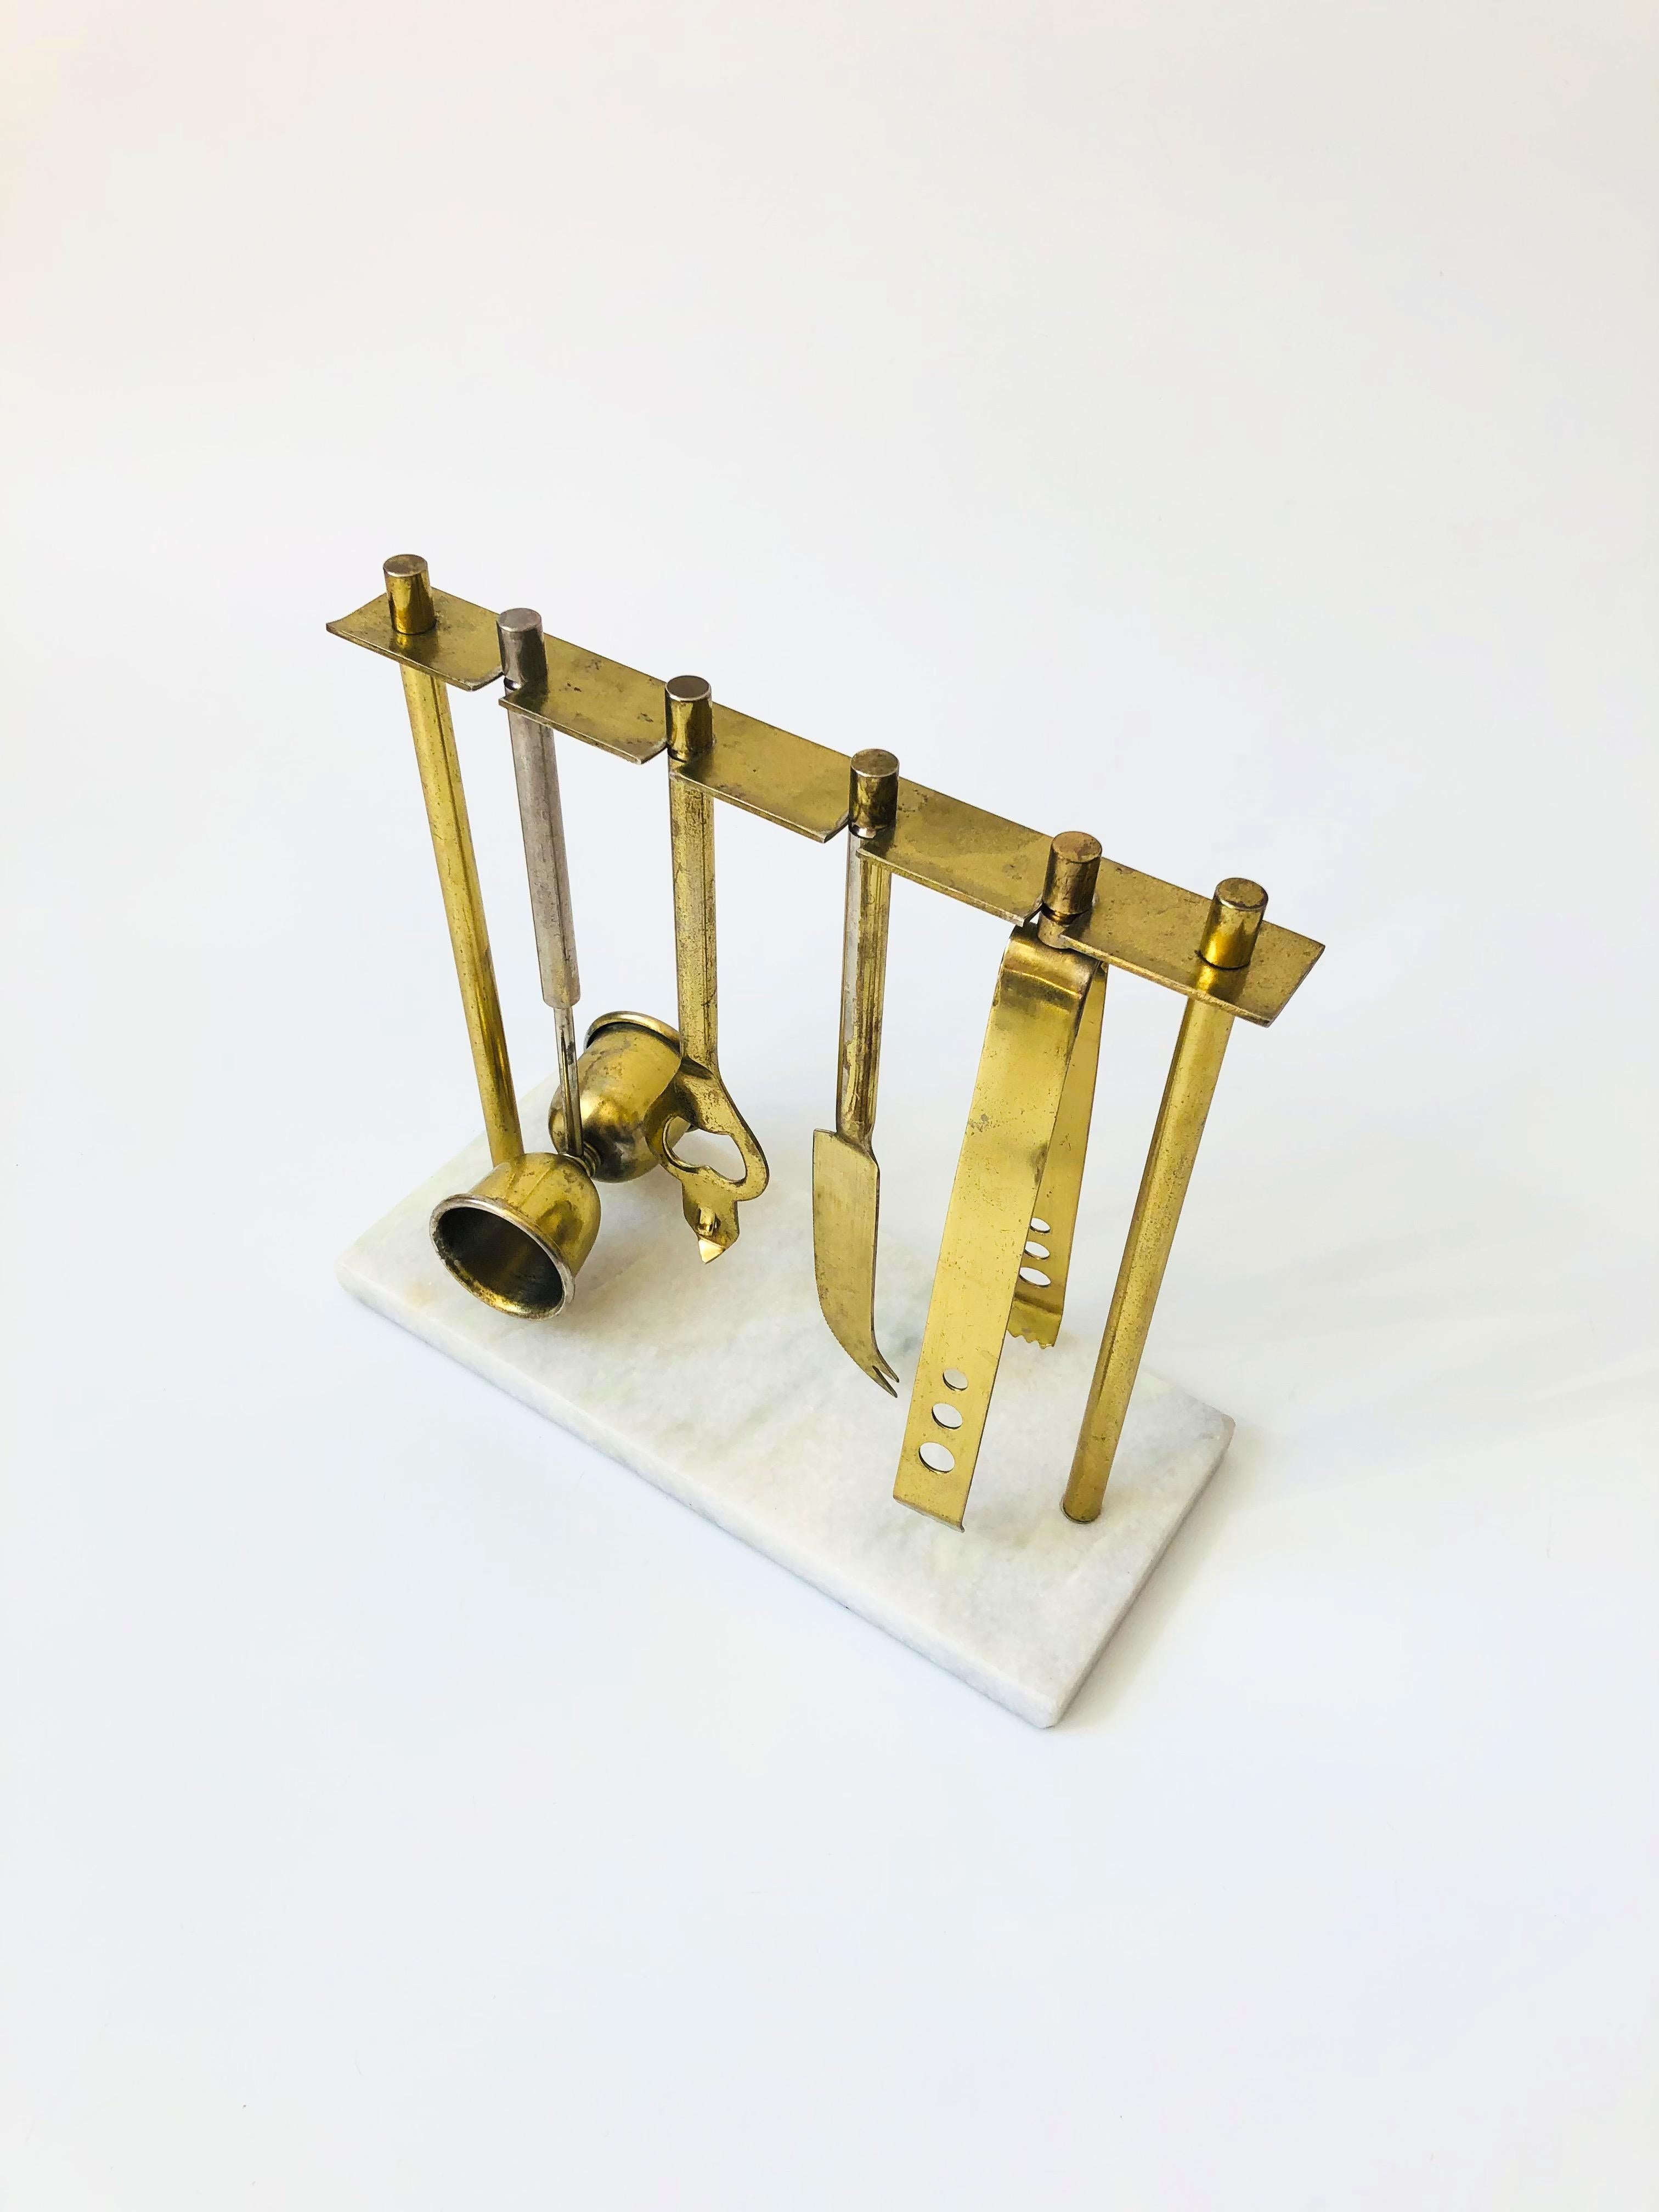 A vintage brass bar tool set with a hanging stand. Each piece is made of brass, hanging on a brass frame that is mounted to a marble base. The set includes ice tongs, a cocktail knife, a two sided jigger, and a bottle opener.
   